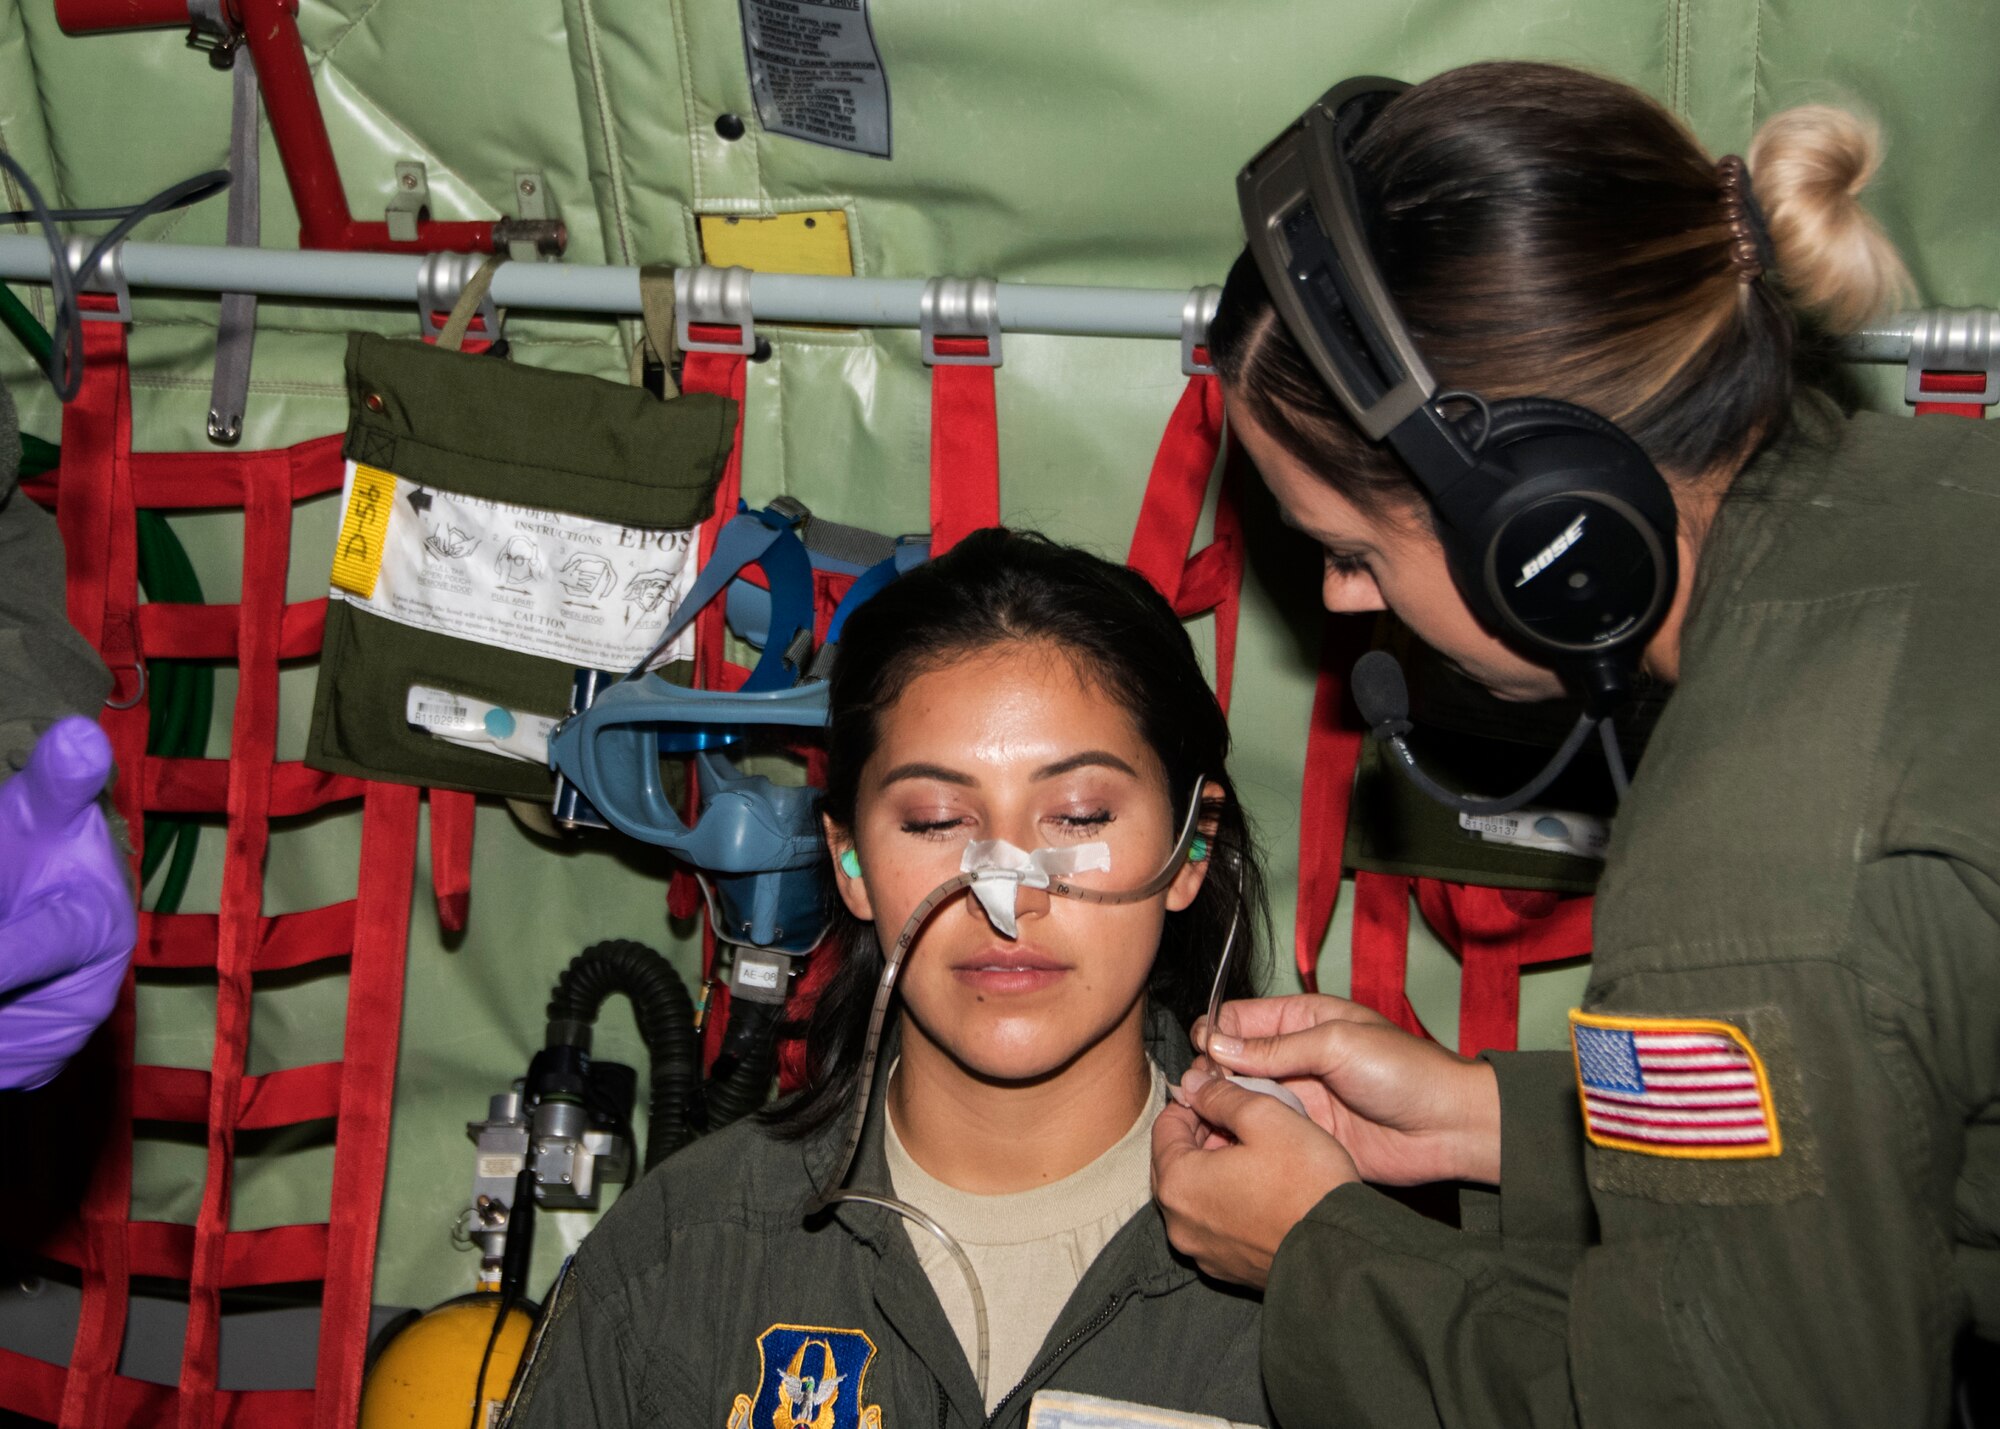 Master Sgt. Kat Hamblin, 459th Aeromedical Evacuation Squadron, shows a taping technique of a nasal gastric tube to protect its accidental removal on Senior Airman Maria Moposita during an off station trainer on a KC-135 Stratotanker, Sept. 20, 2019. The AES team conducted training during a flight to Wright Patterson, Ohio, where they later participated in the Air Force Marathon. (U.S. Air Force photo by Staff Sgt. Cierra Presentado/Released)